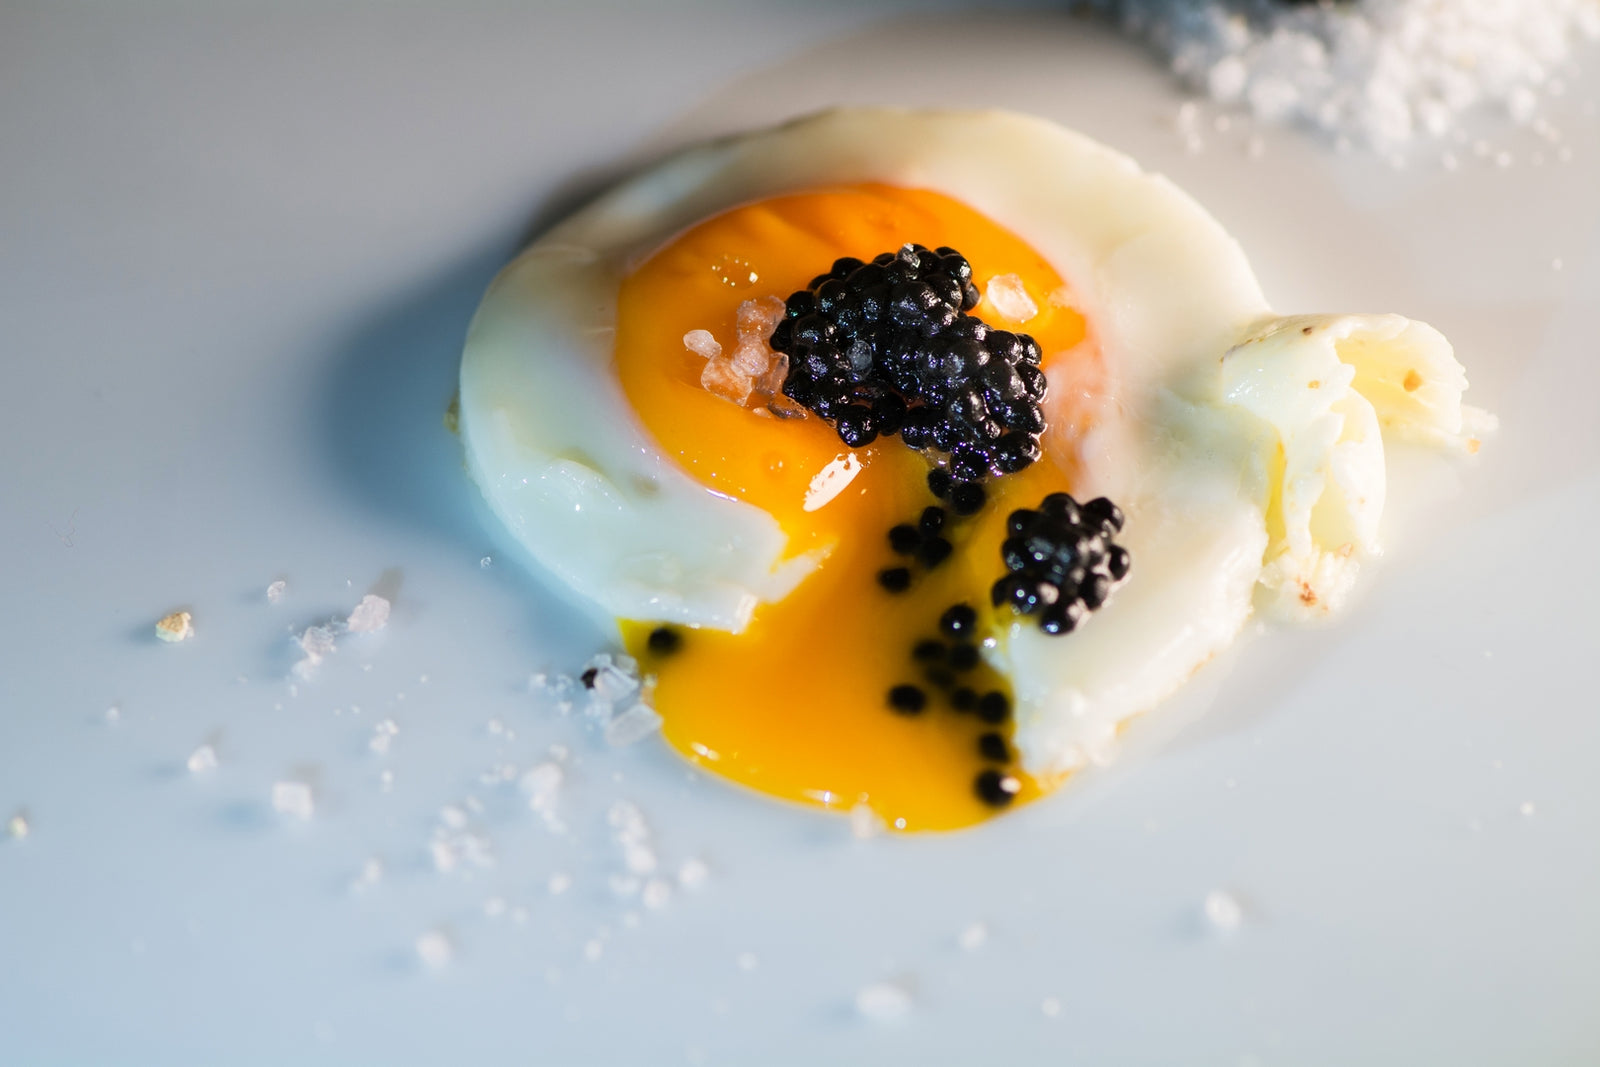 SUNNY-SIDE-UP EGG WITH BLACK TRUFFLE PEARLS